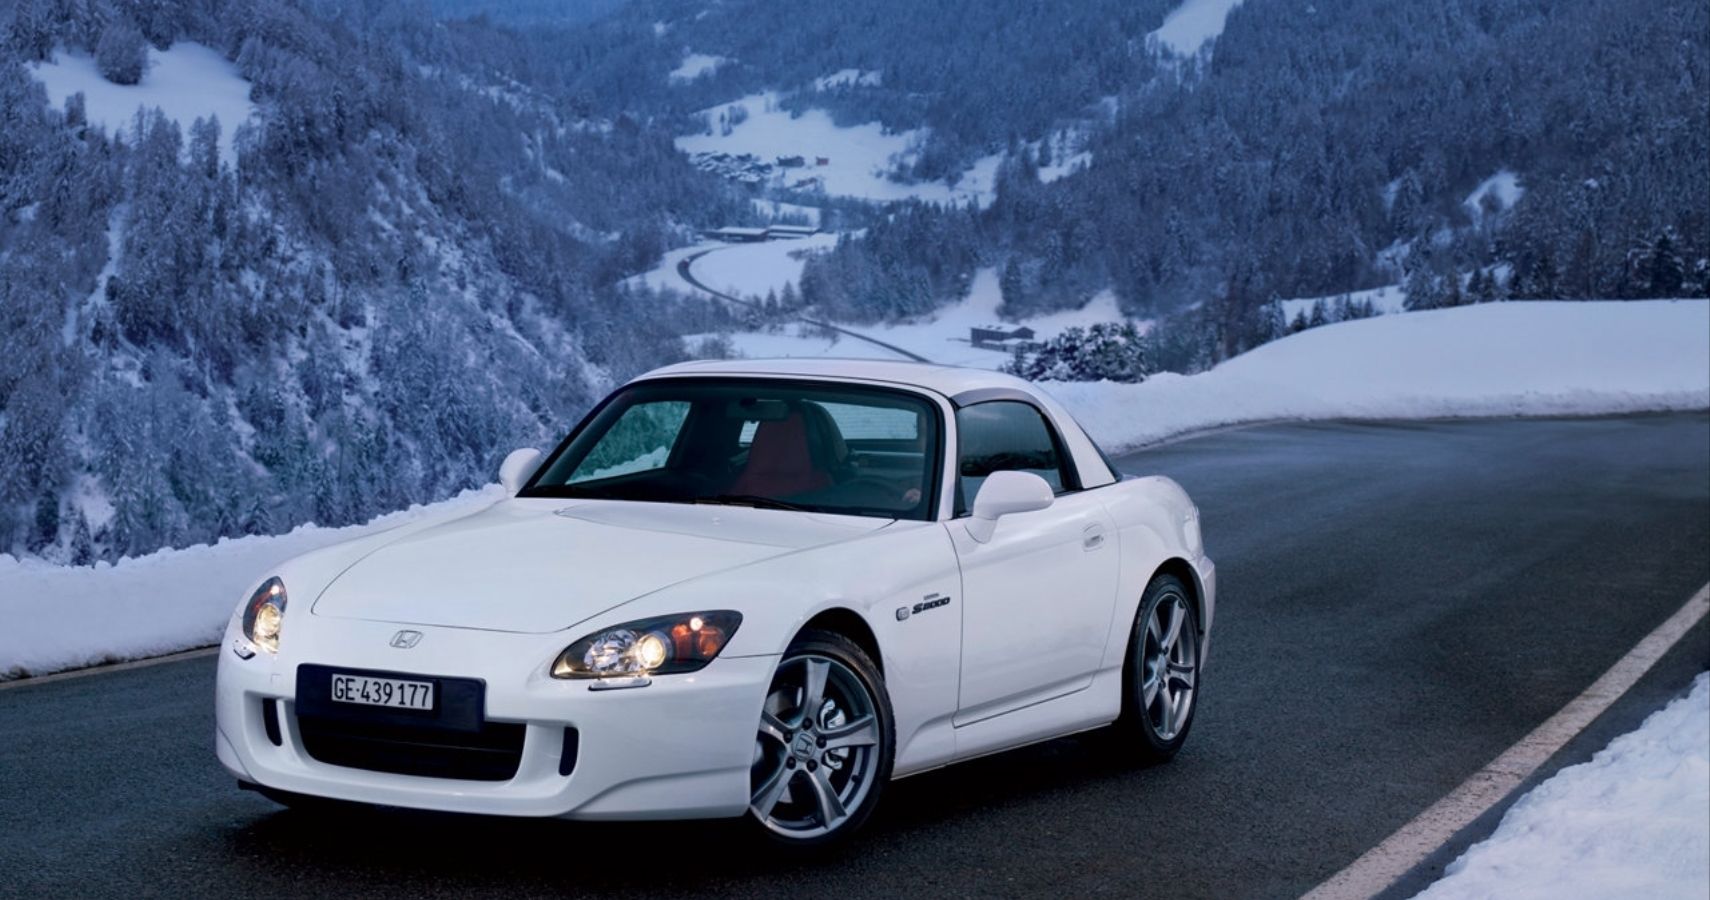 Honda-S2000_Ultimate_Edition-2009 Front View On Mountain Roads